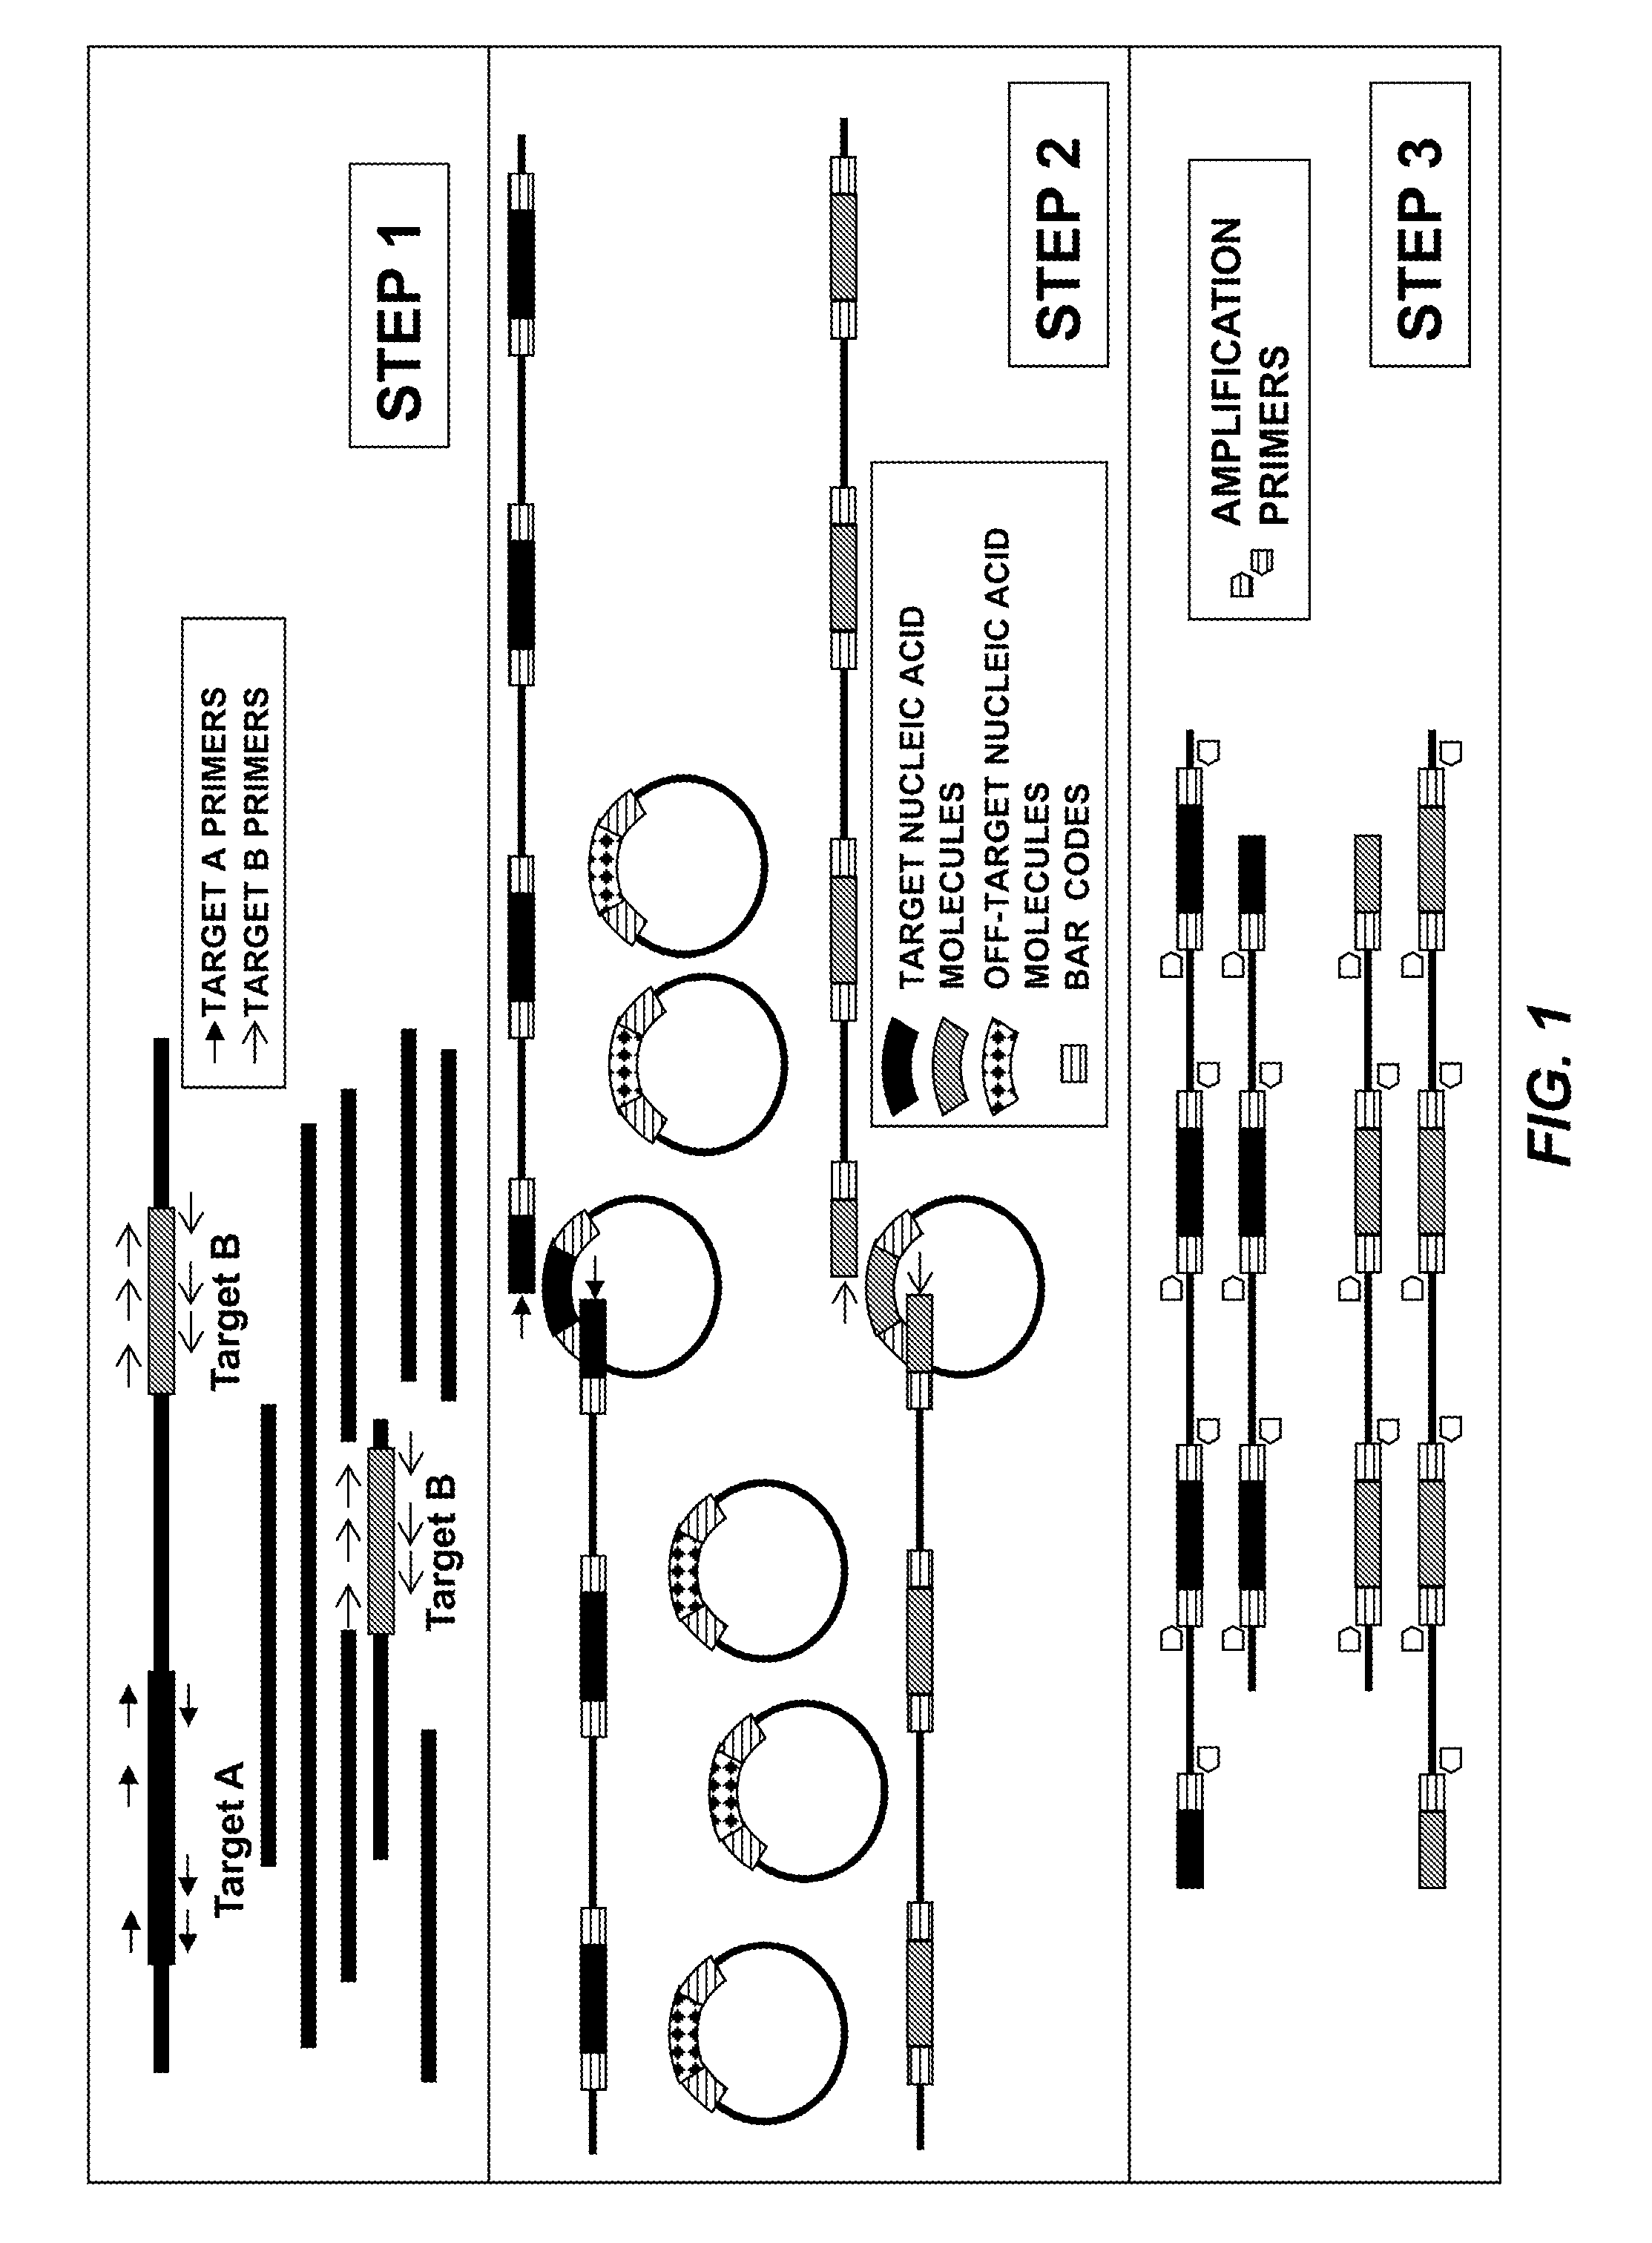 Compositions and methods for sensitive mutation detection in nucleic acid molecules